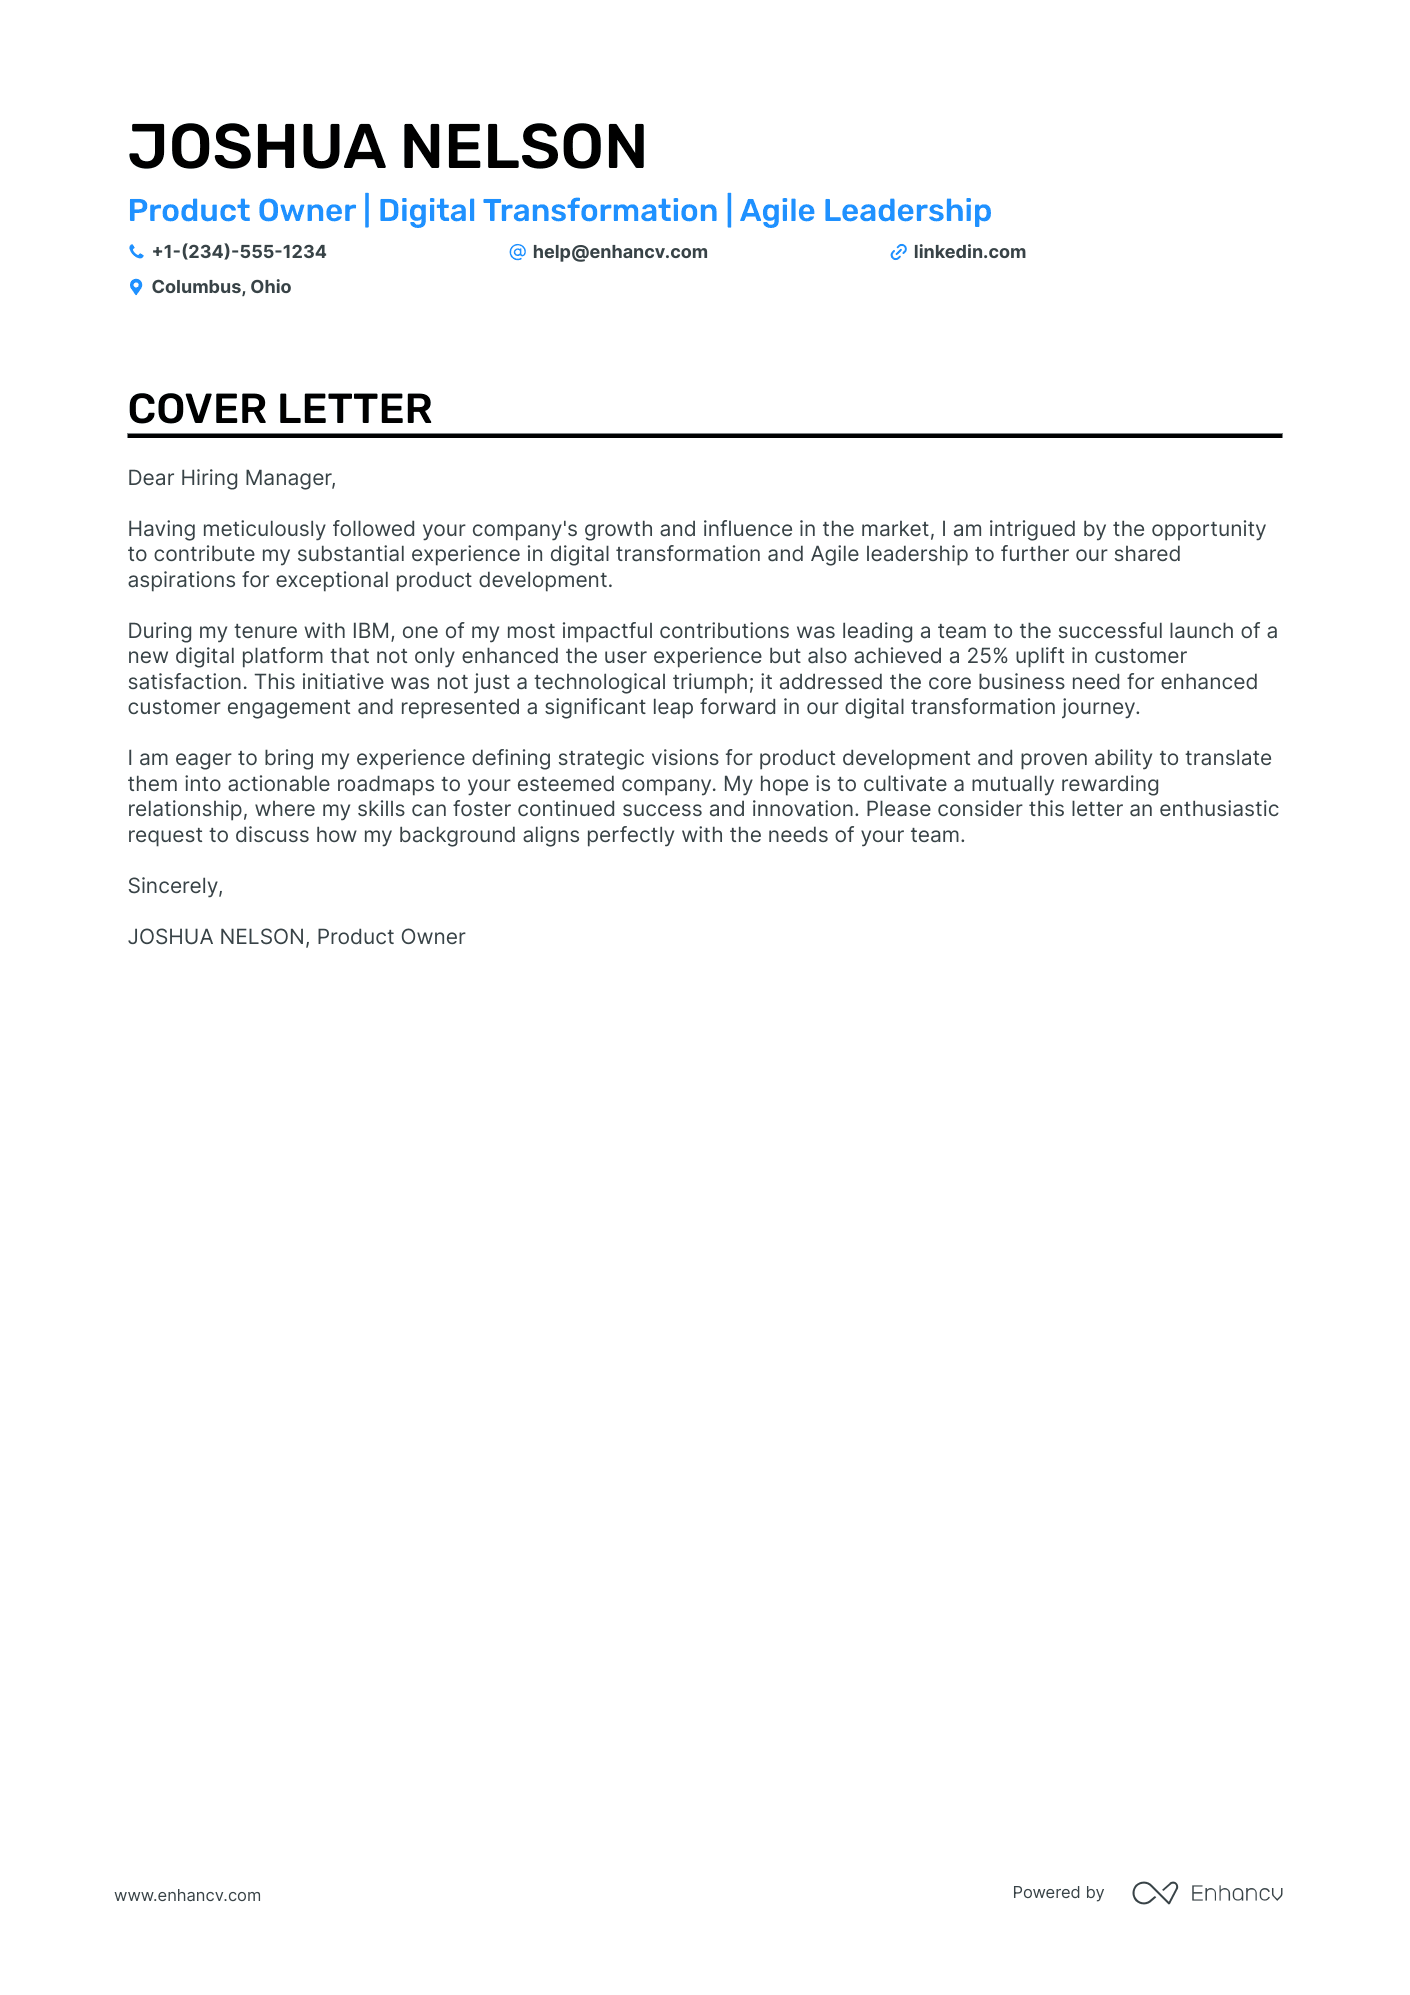 Digital Product Manager cover letter